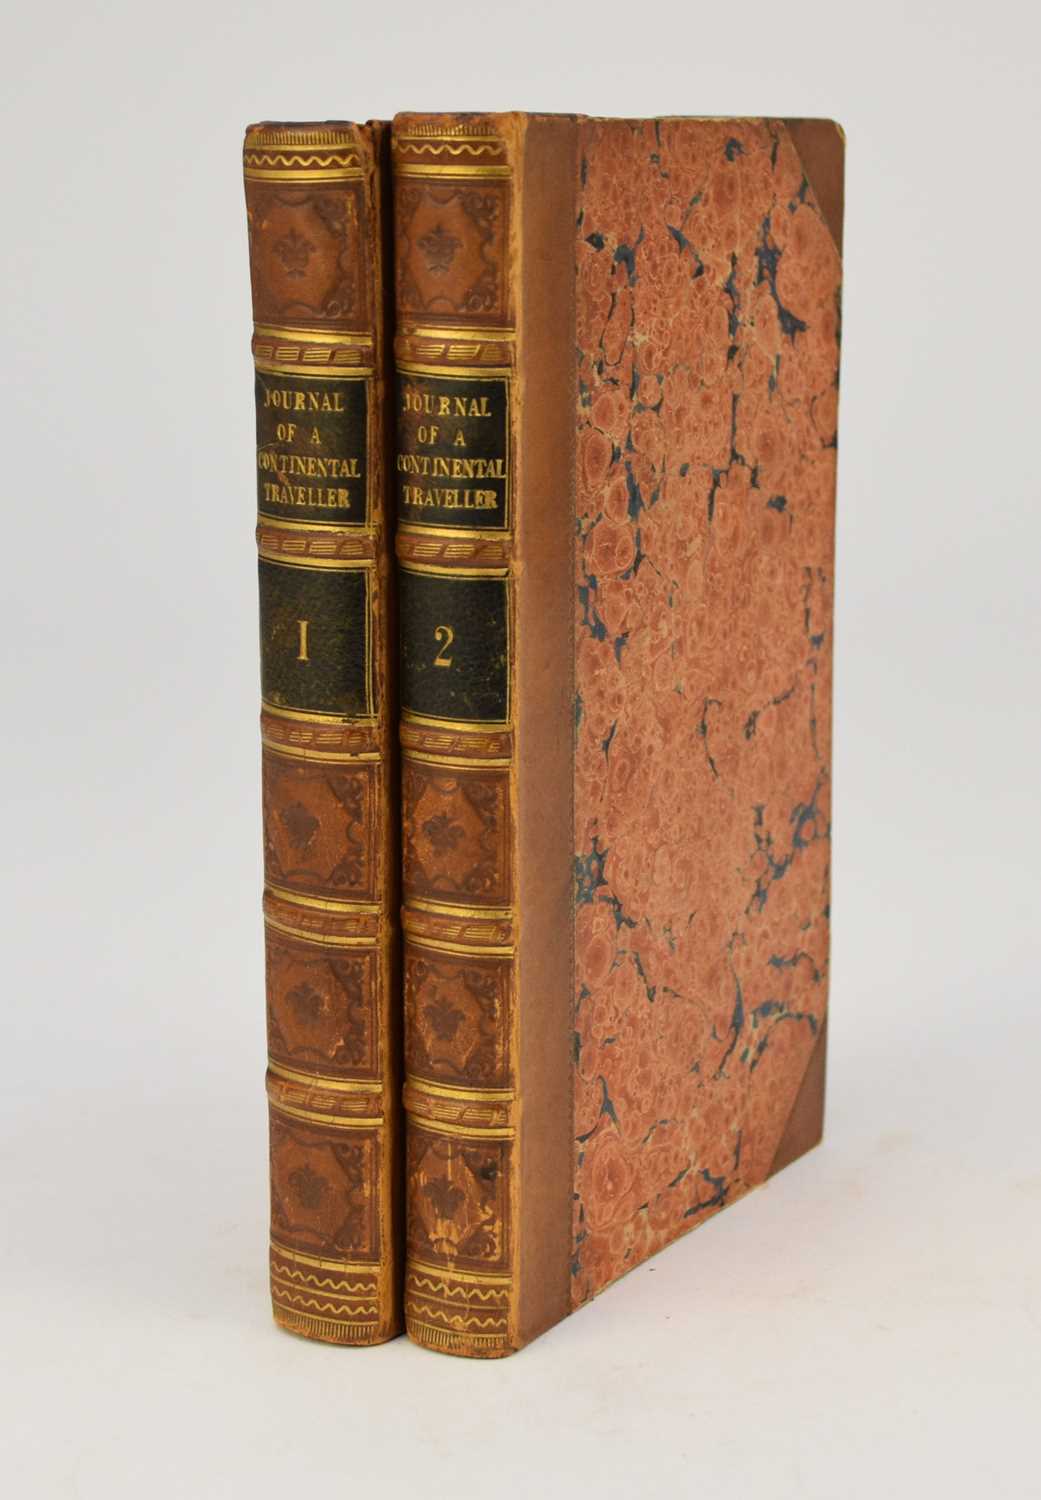 Lot 52 - HOGG, Thomas Jefferson, Two Hundred and Nine Days; or the Journal of a Traveller on the Continent. 2 vols 1827. Contemporary half calf, marbled boards (2)